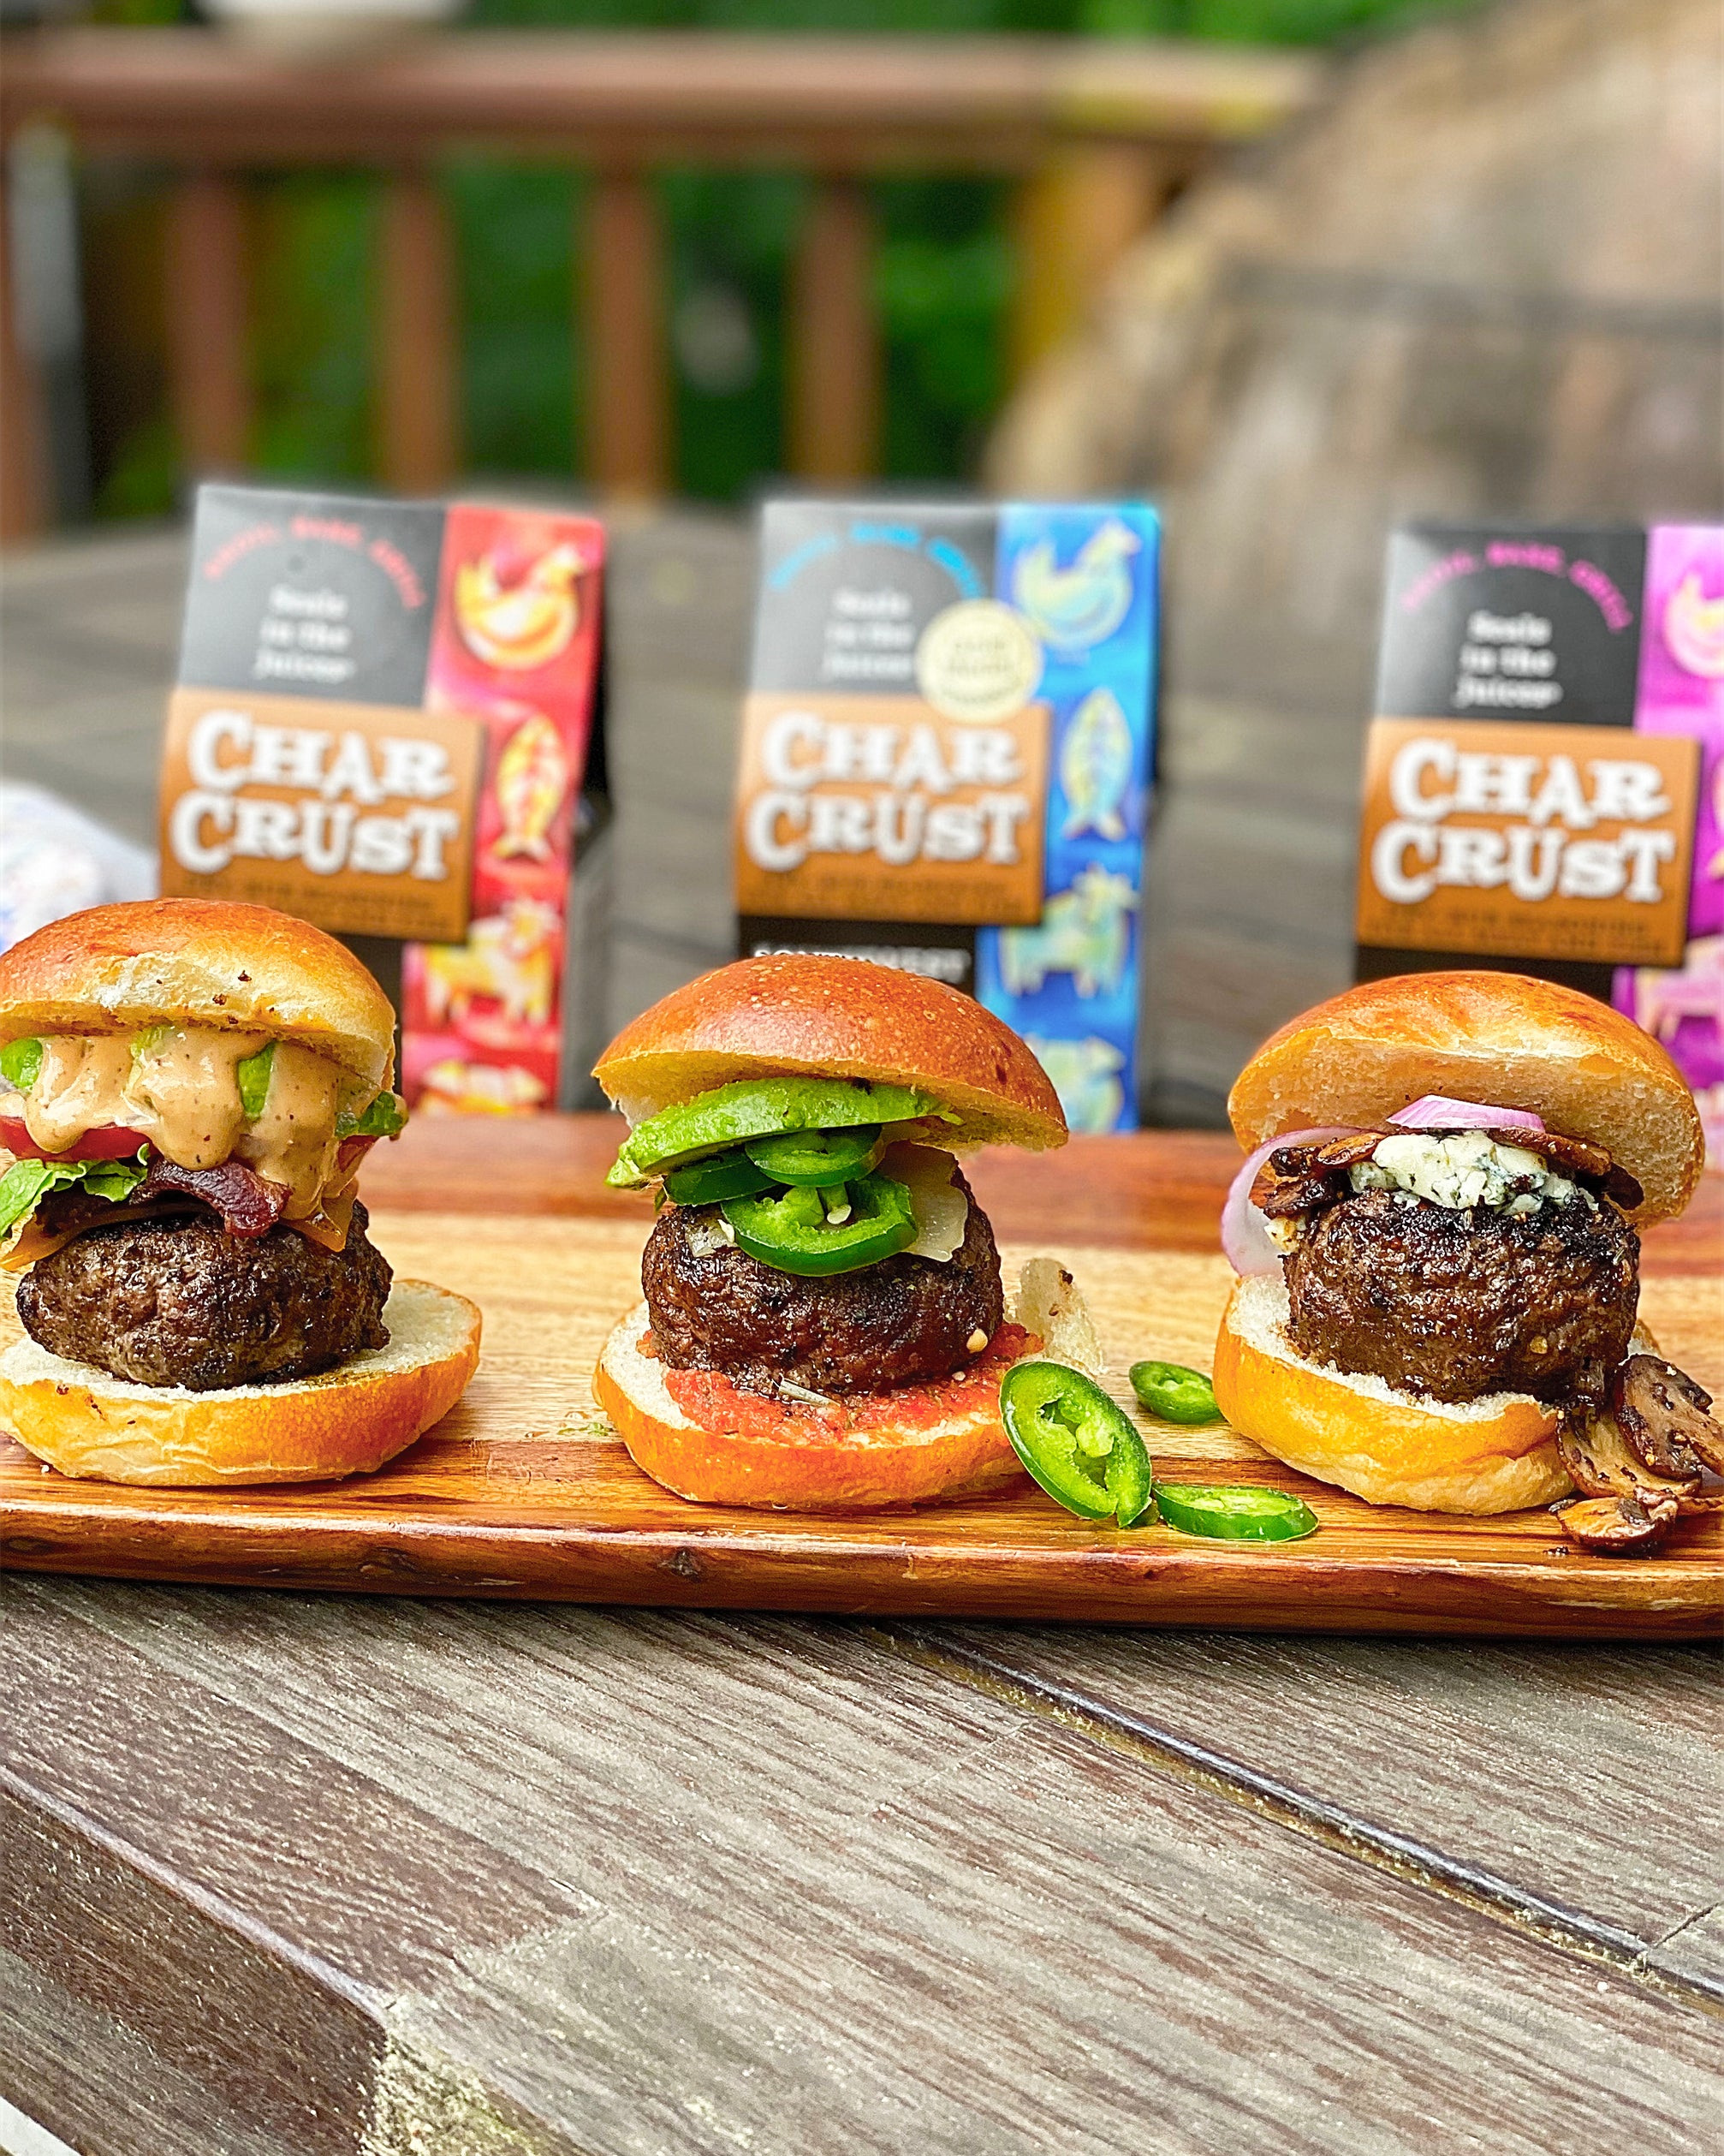 Char Crust Sliders with different toppings and sauces. Packages of multiple flavors in the background.